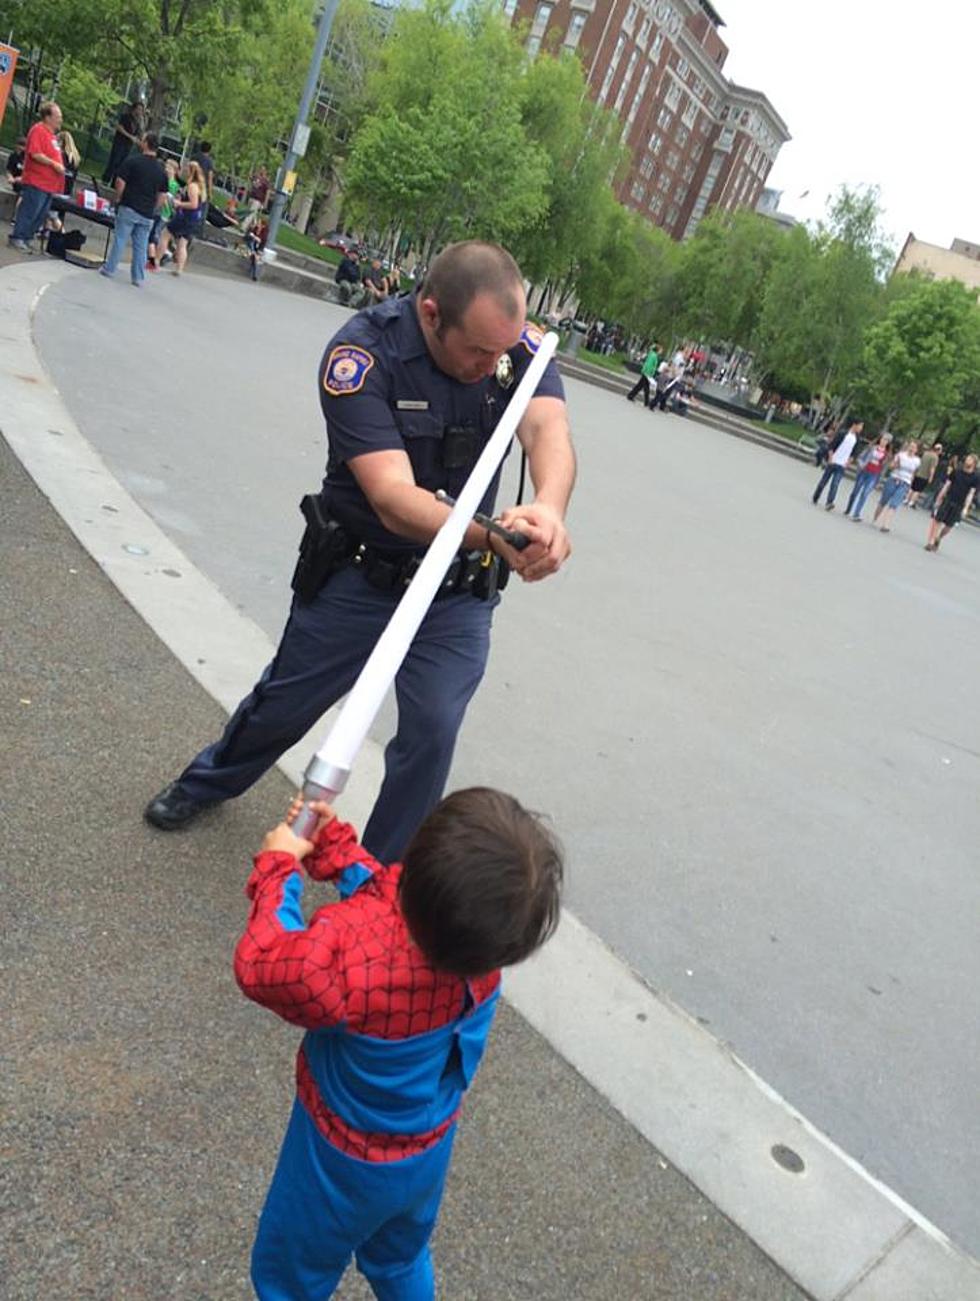 Is Officer Ickes The Kid Whisperer? I Say Yes